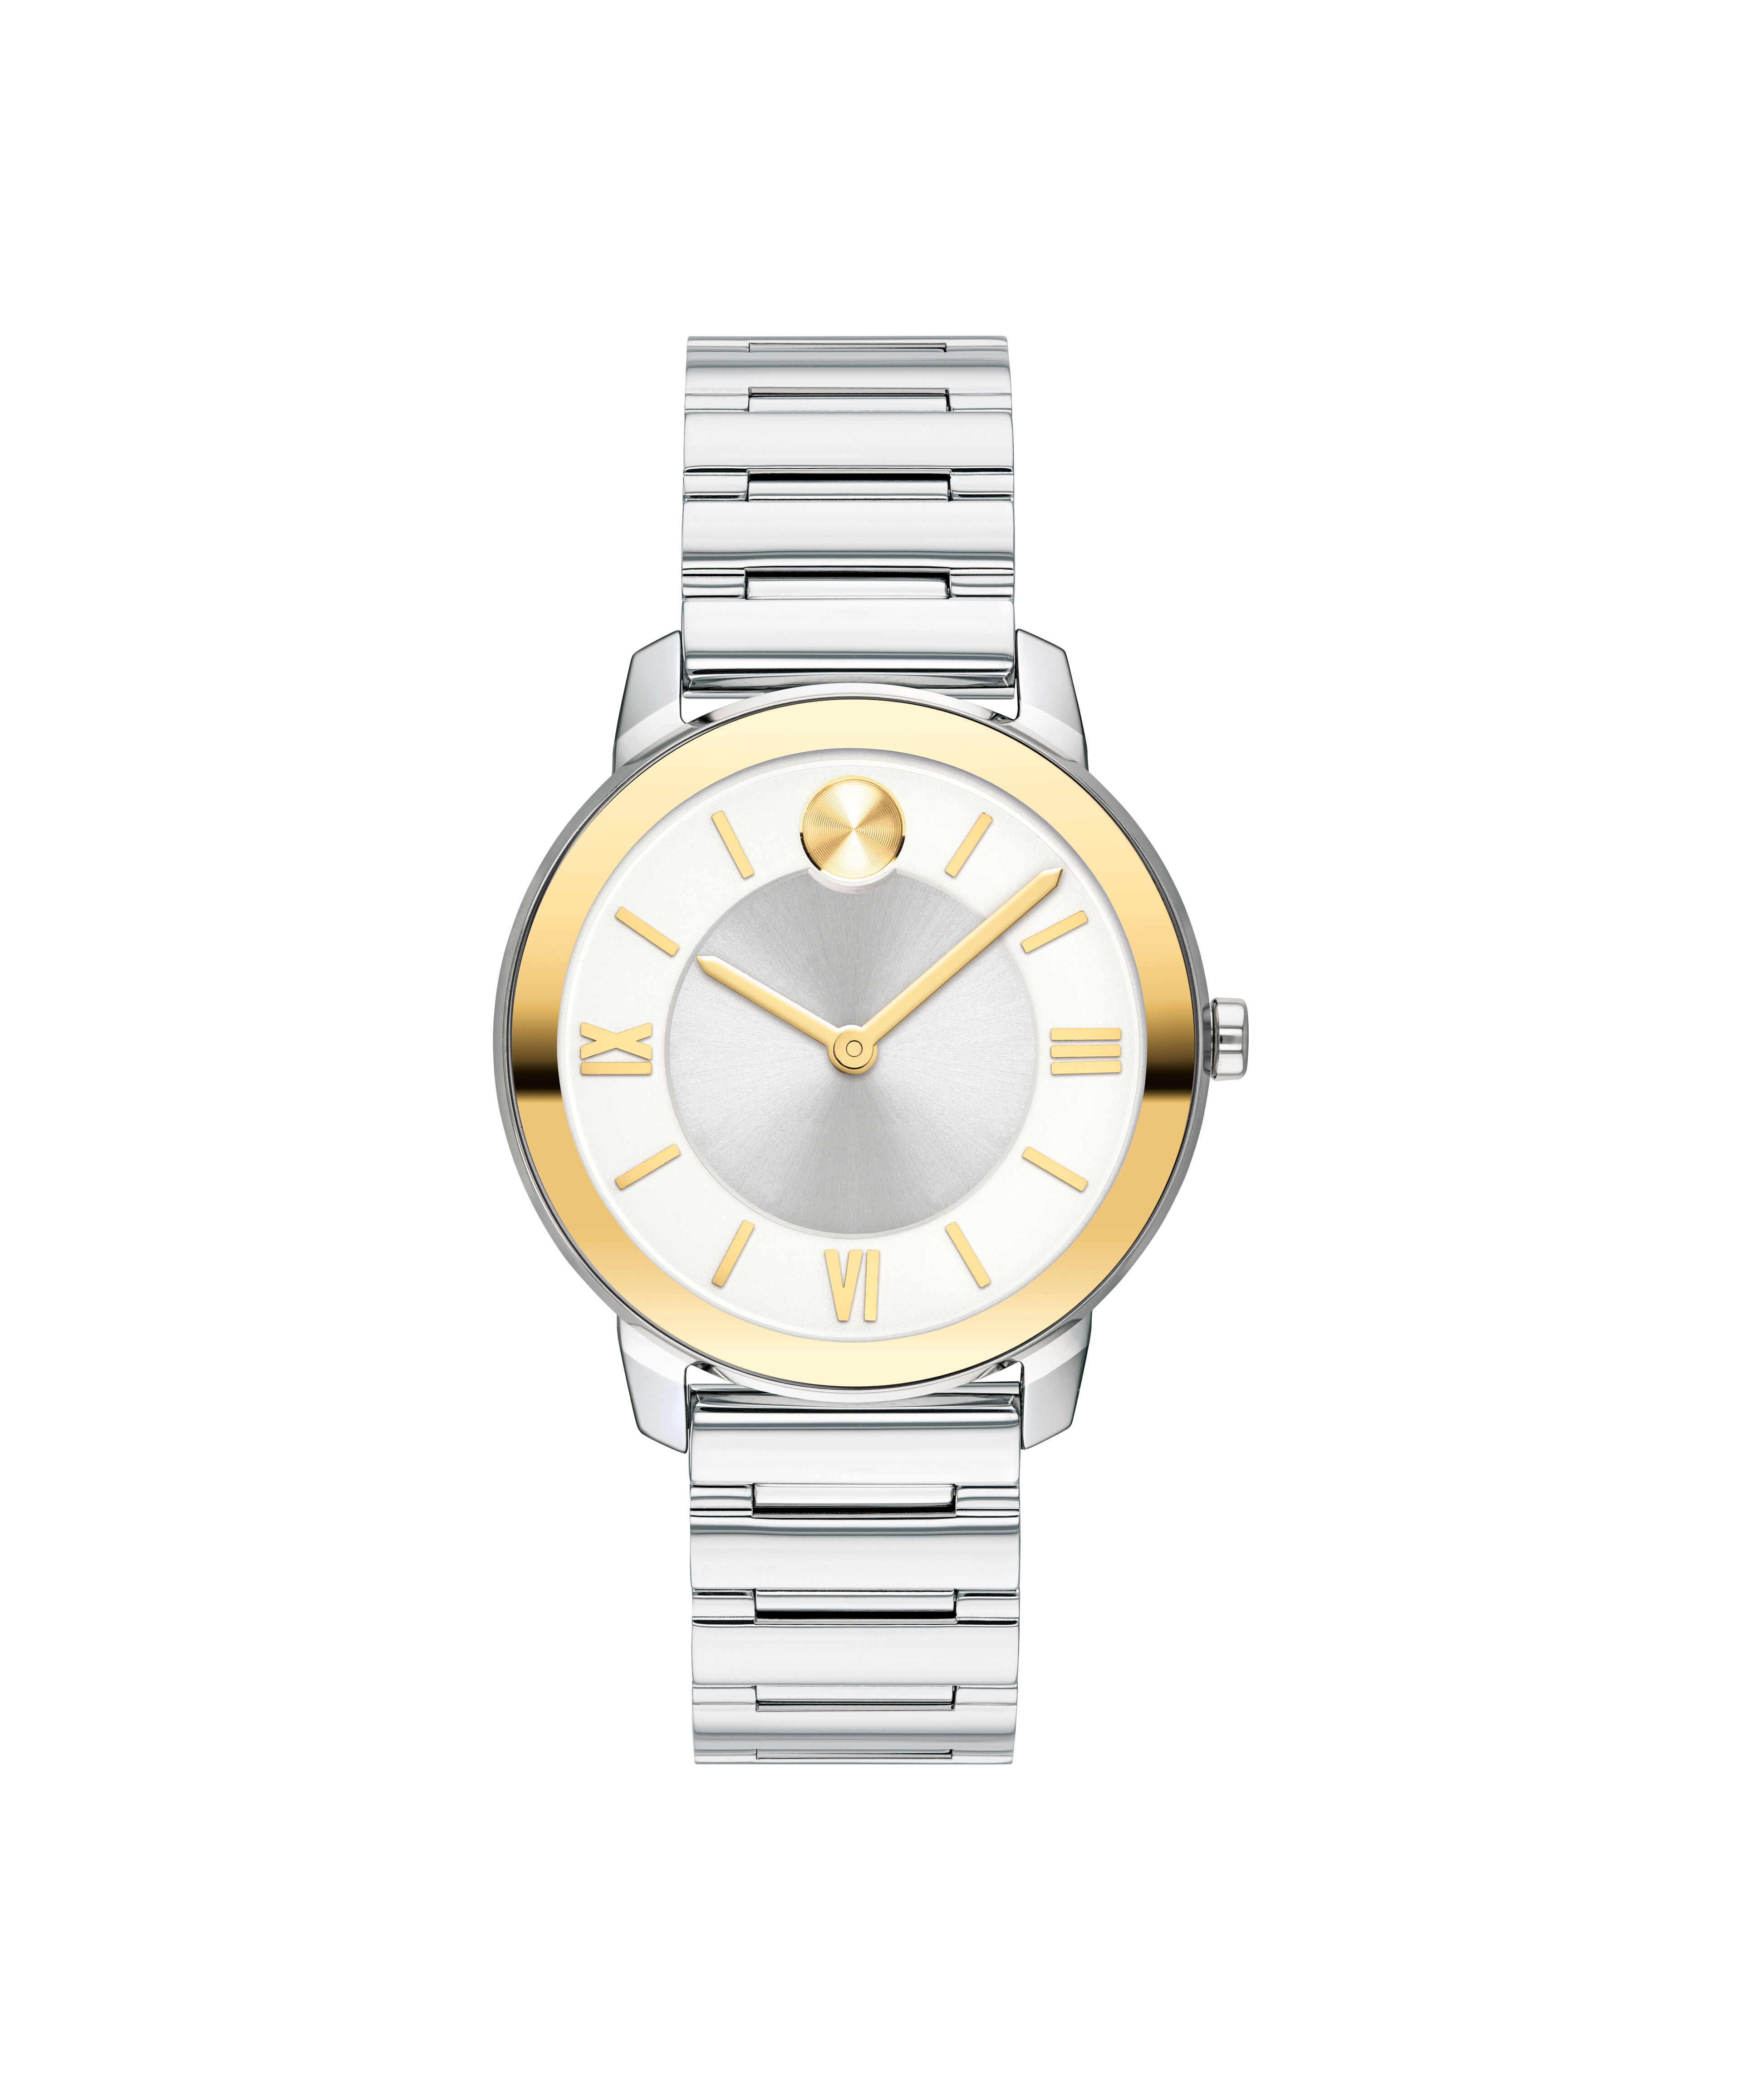 Movado S.E. Sports Edition Ladies, Blue Mother of Pearl Dial -Steel